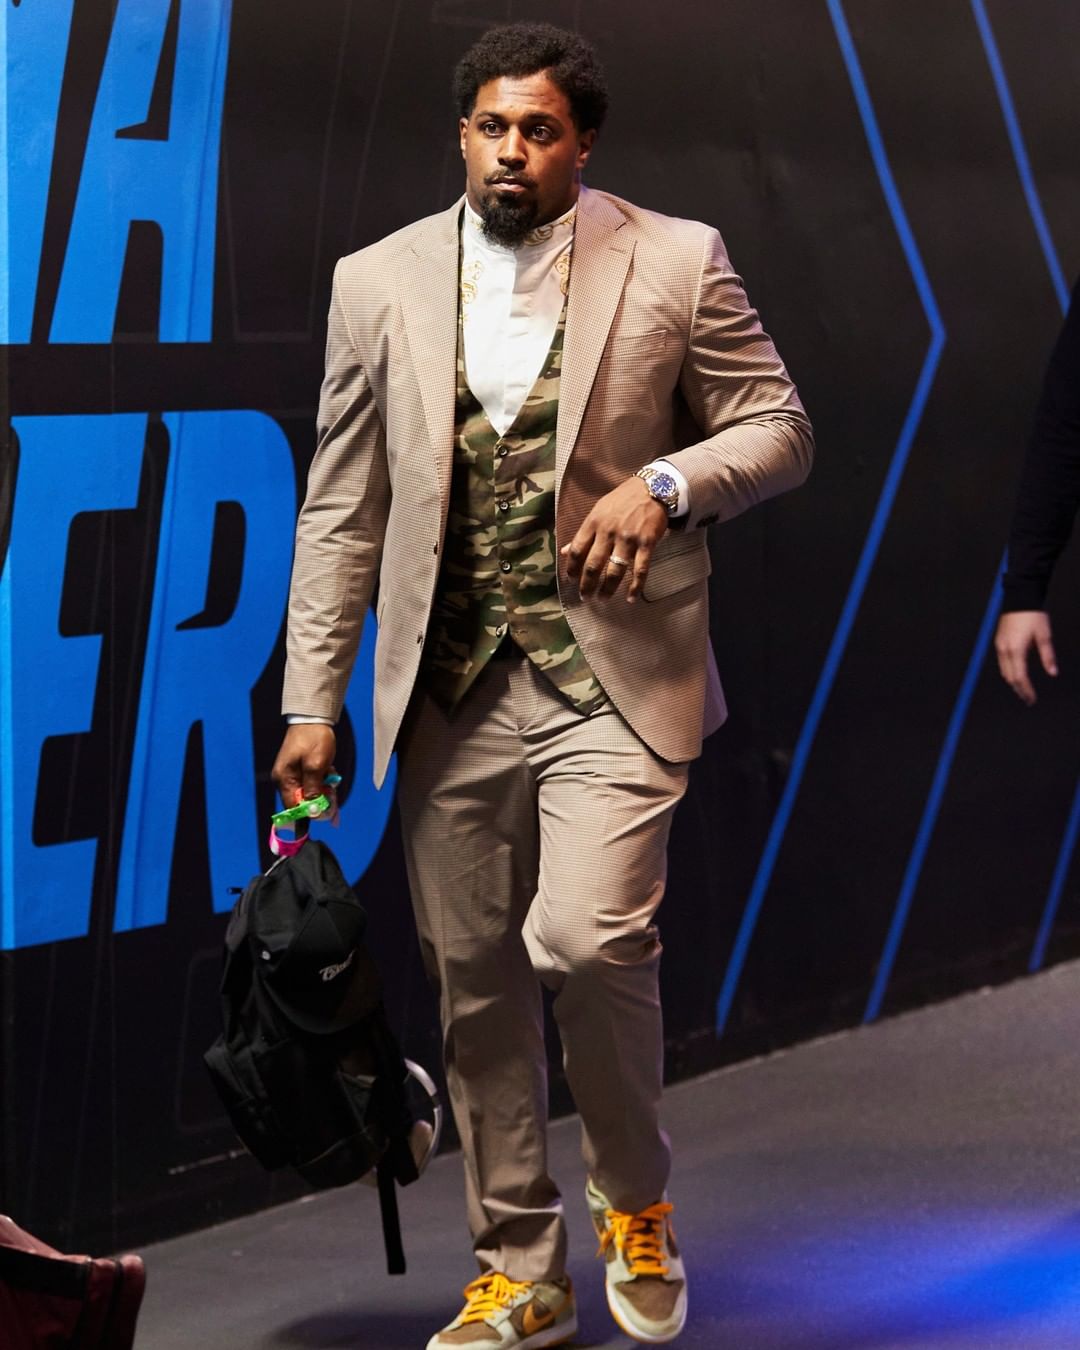 Cam always comes fitted ...